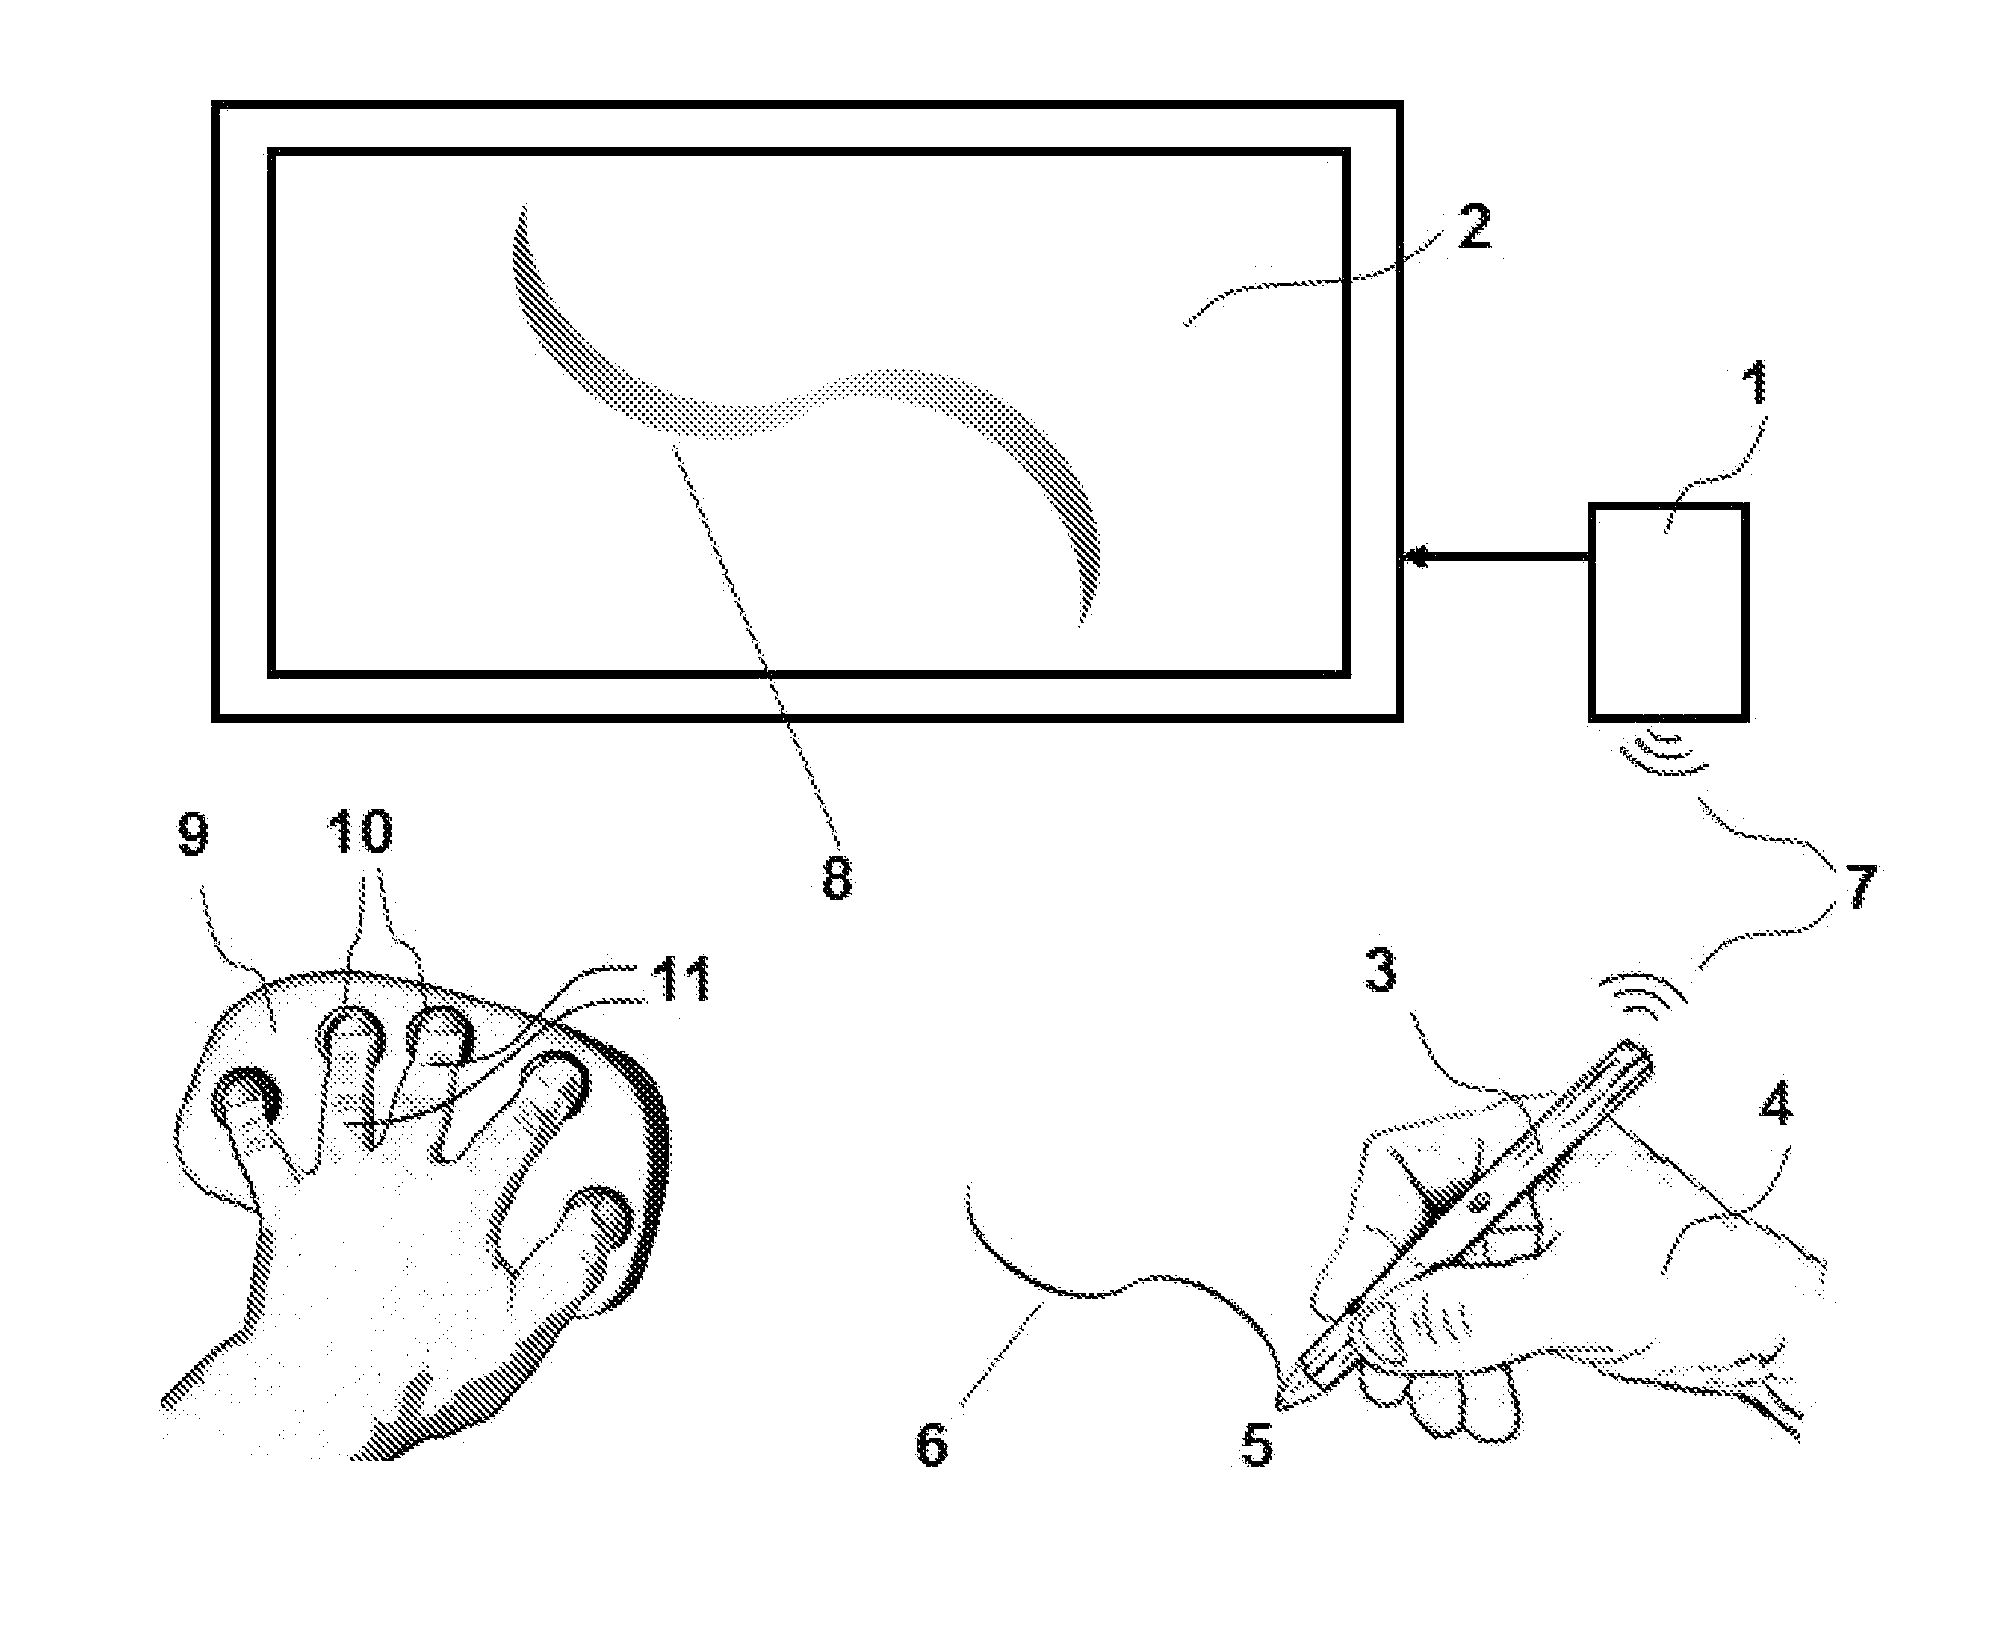 System and method for digital recording of handpainted, handdrawn and handwritten information